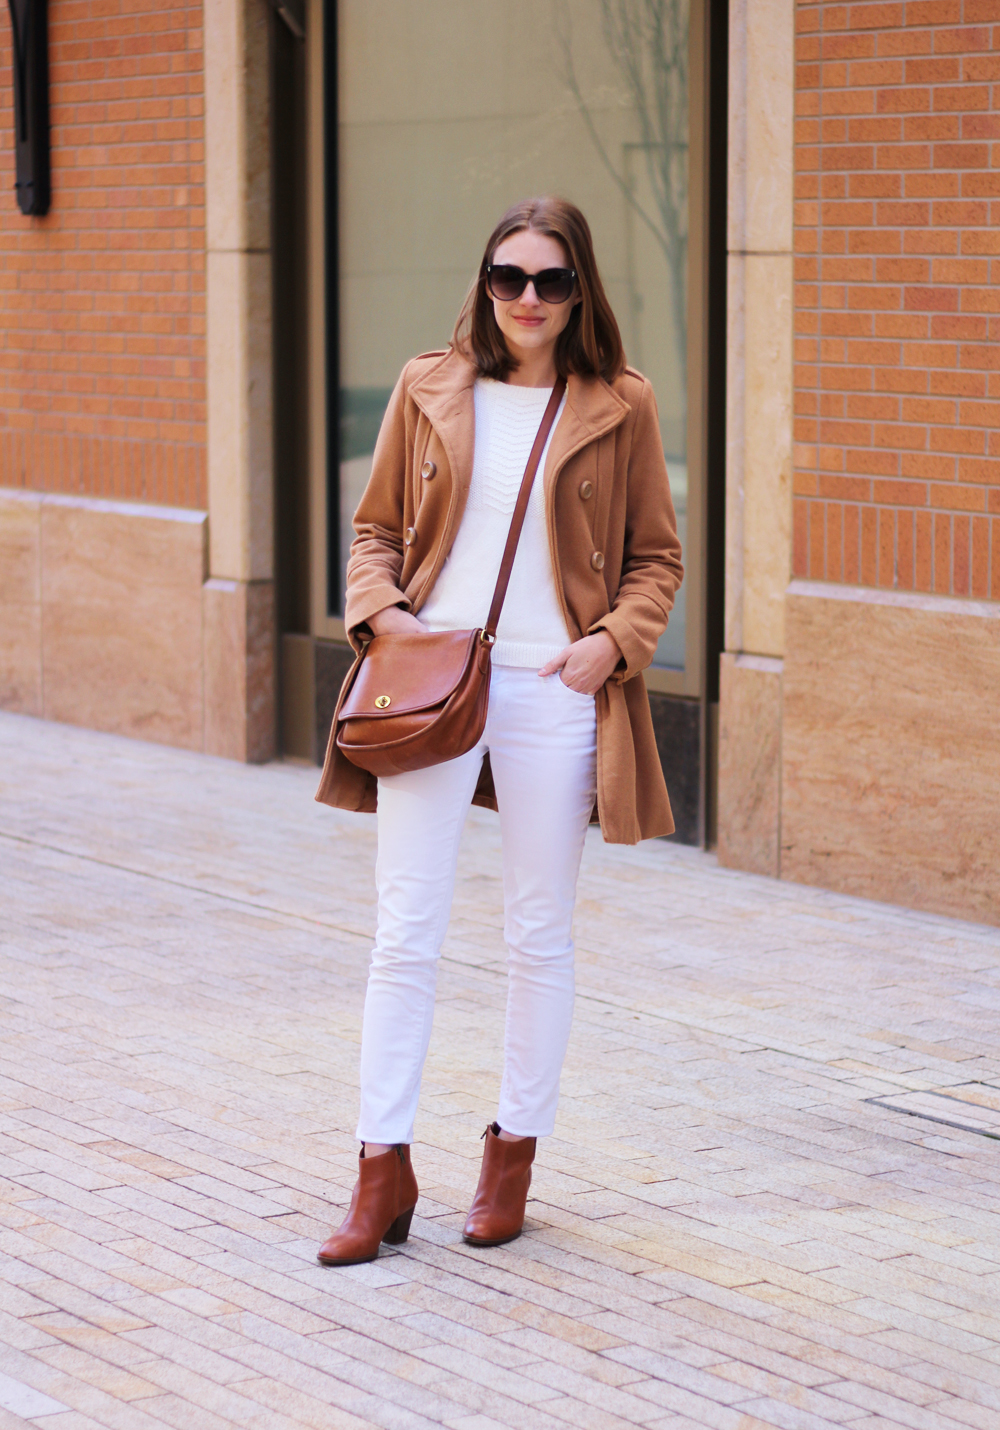 White Jeans & Boots - Cashmere & Jeans